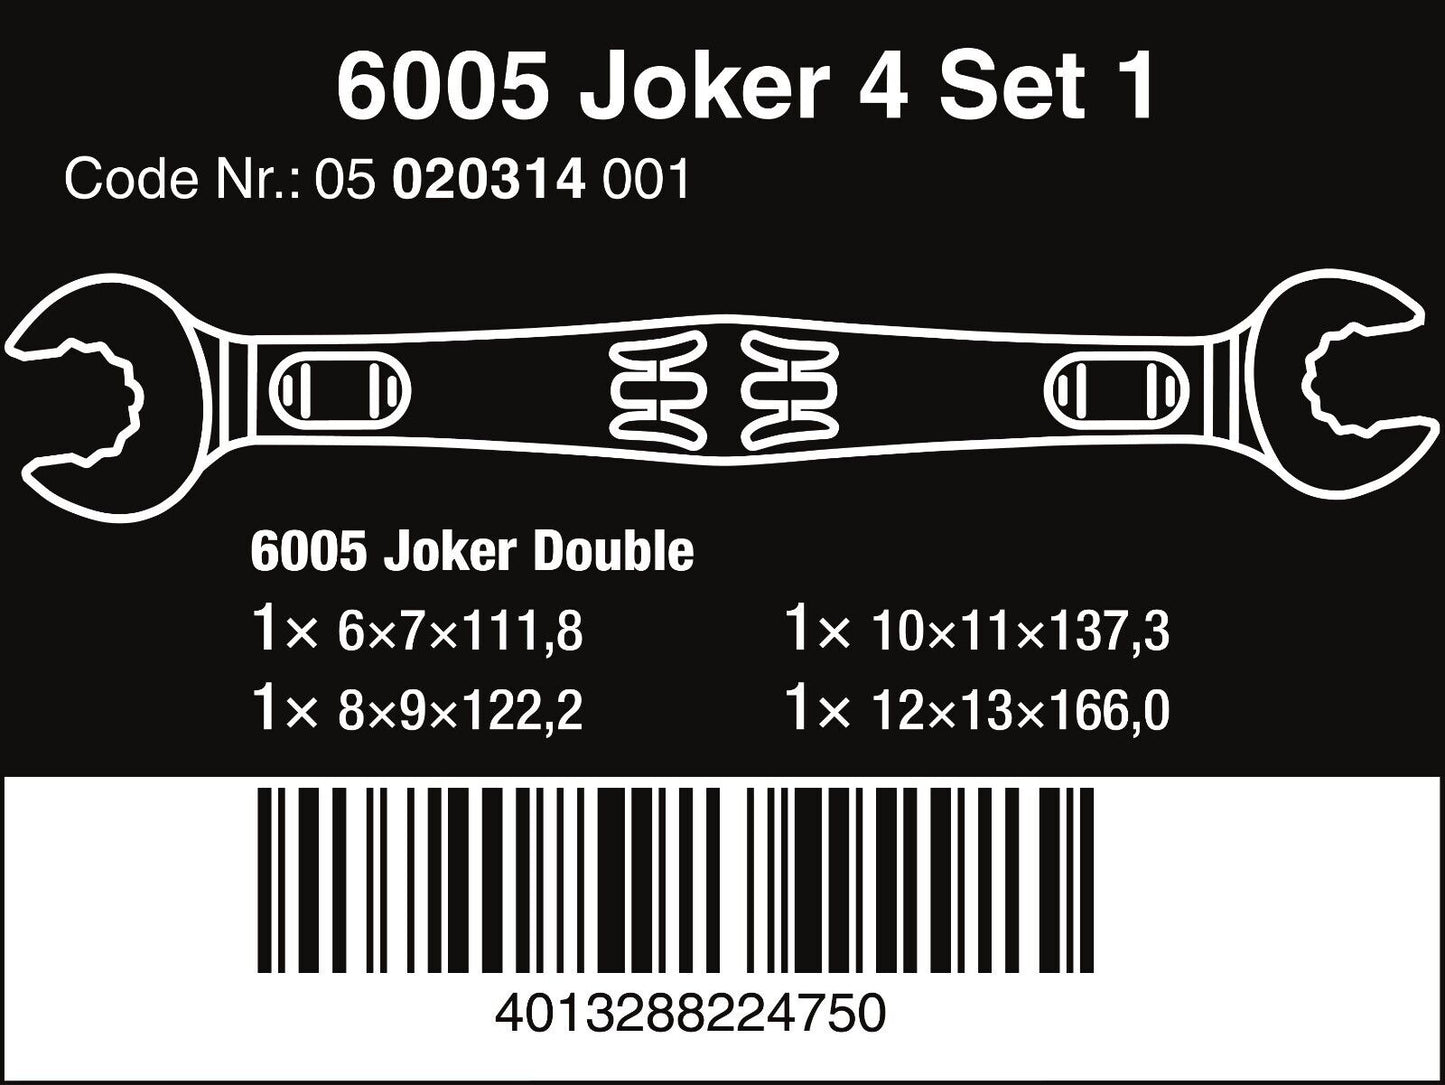 Wera 6005 Joker 4 Set 1 Double Open Ended Wrench Set 4 Pieces Metric 05020314001